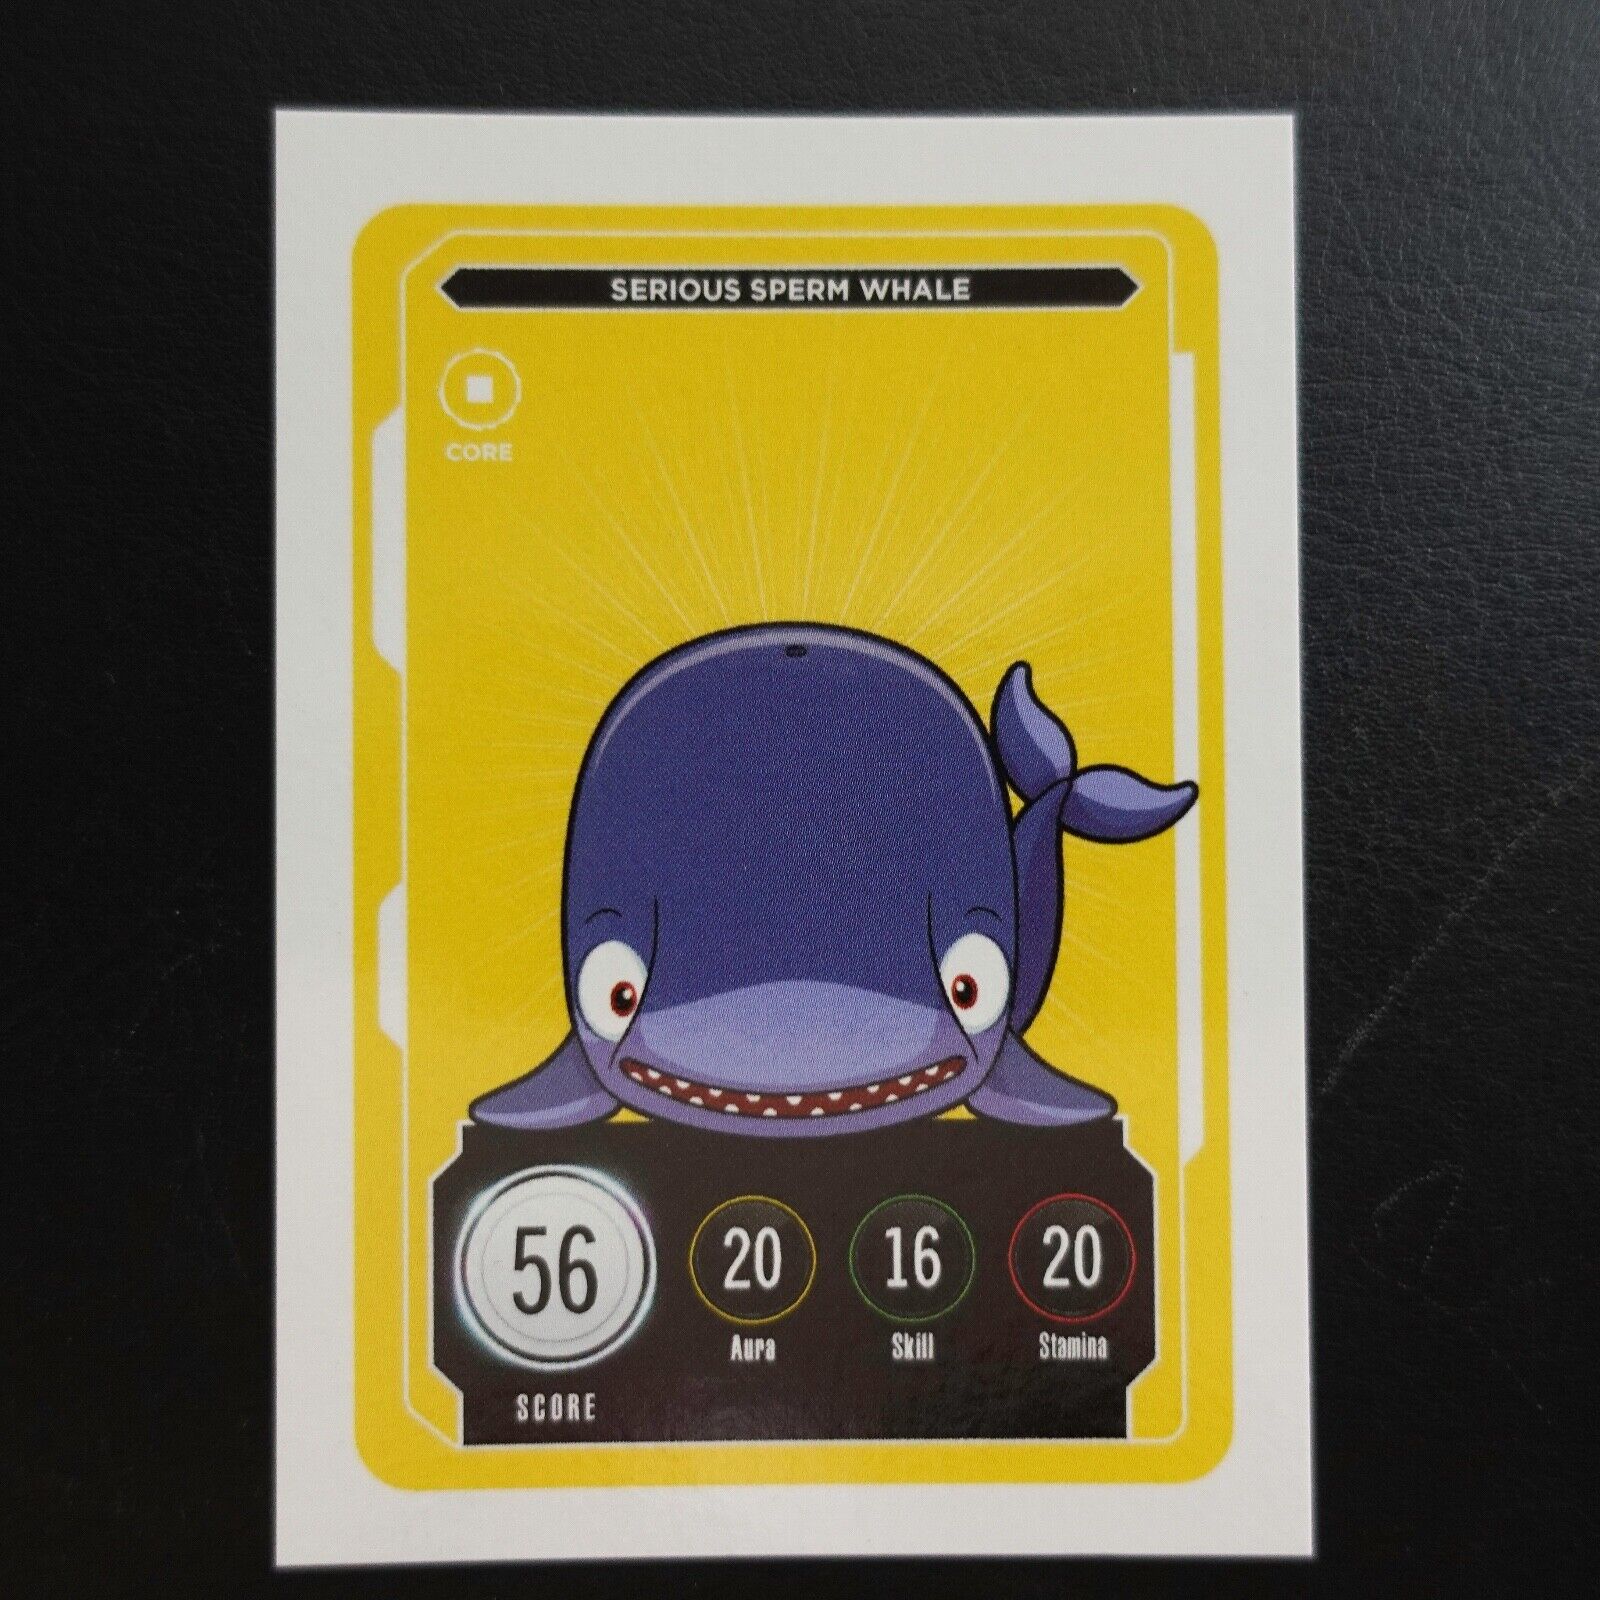 Serious Sperm Whale Veefriends Series 2 Compete And Collect Trading Card Gary V